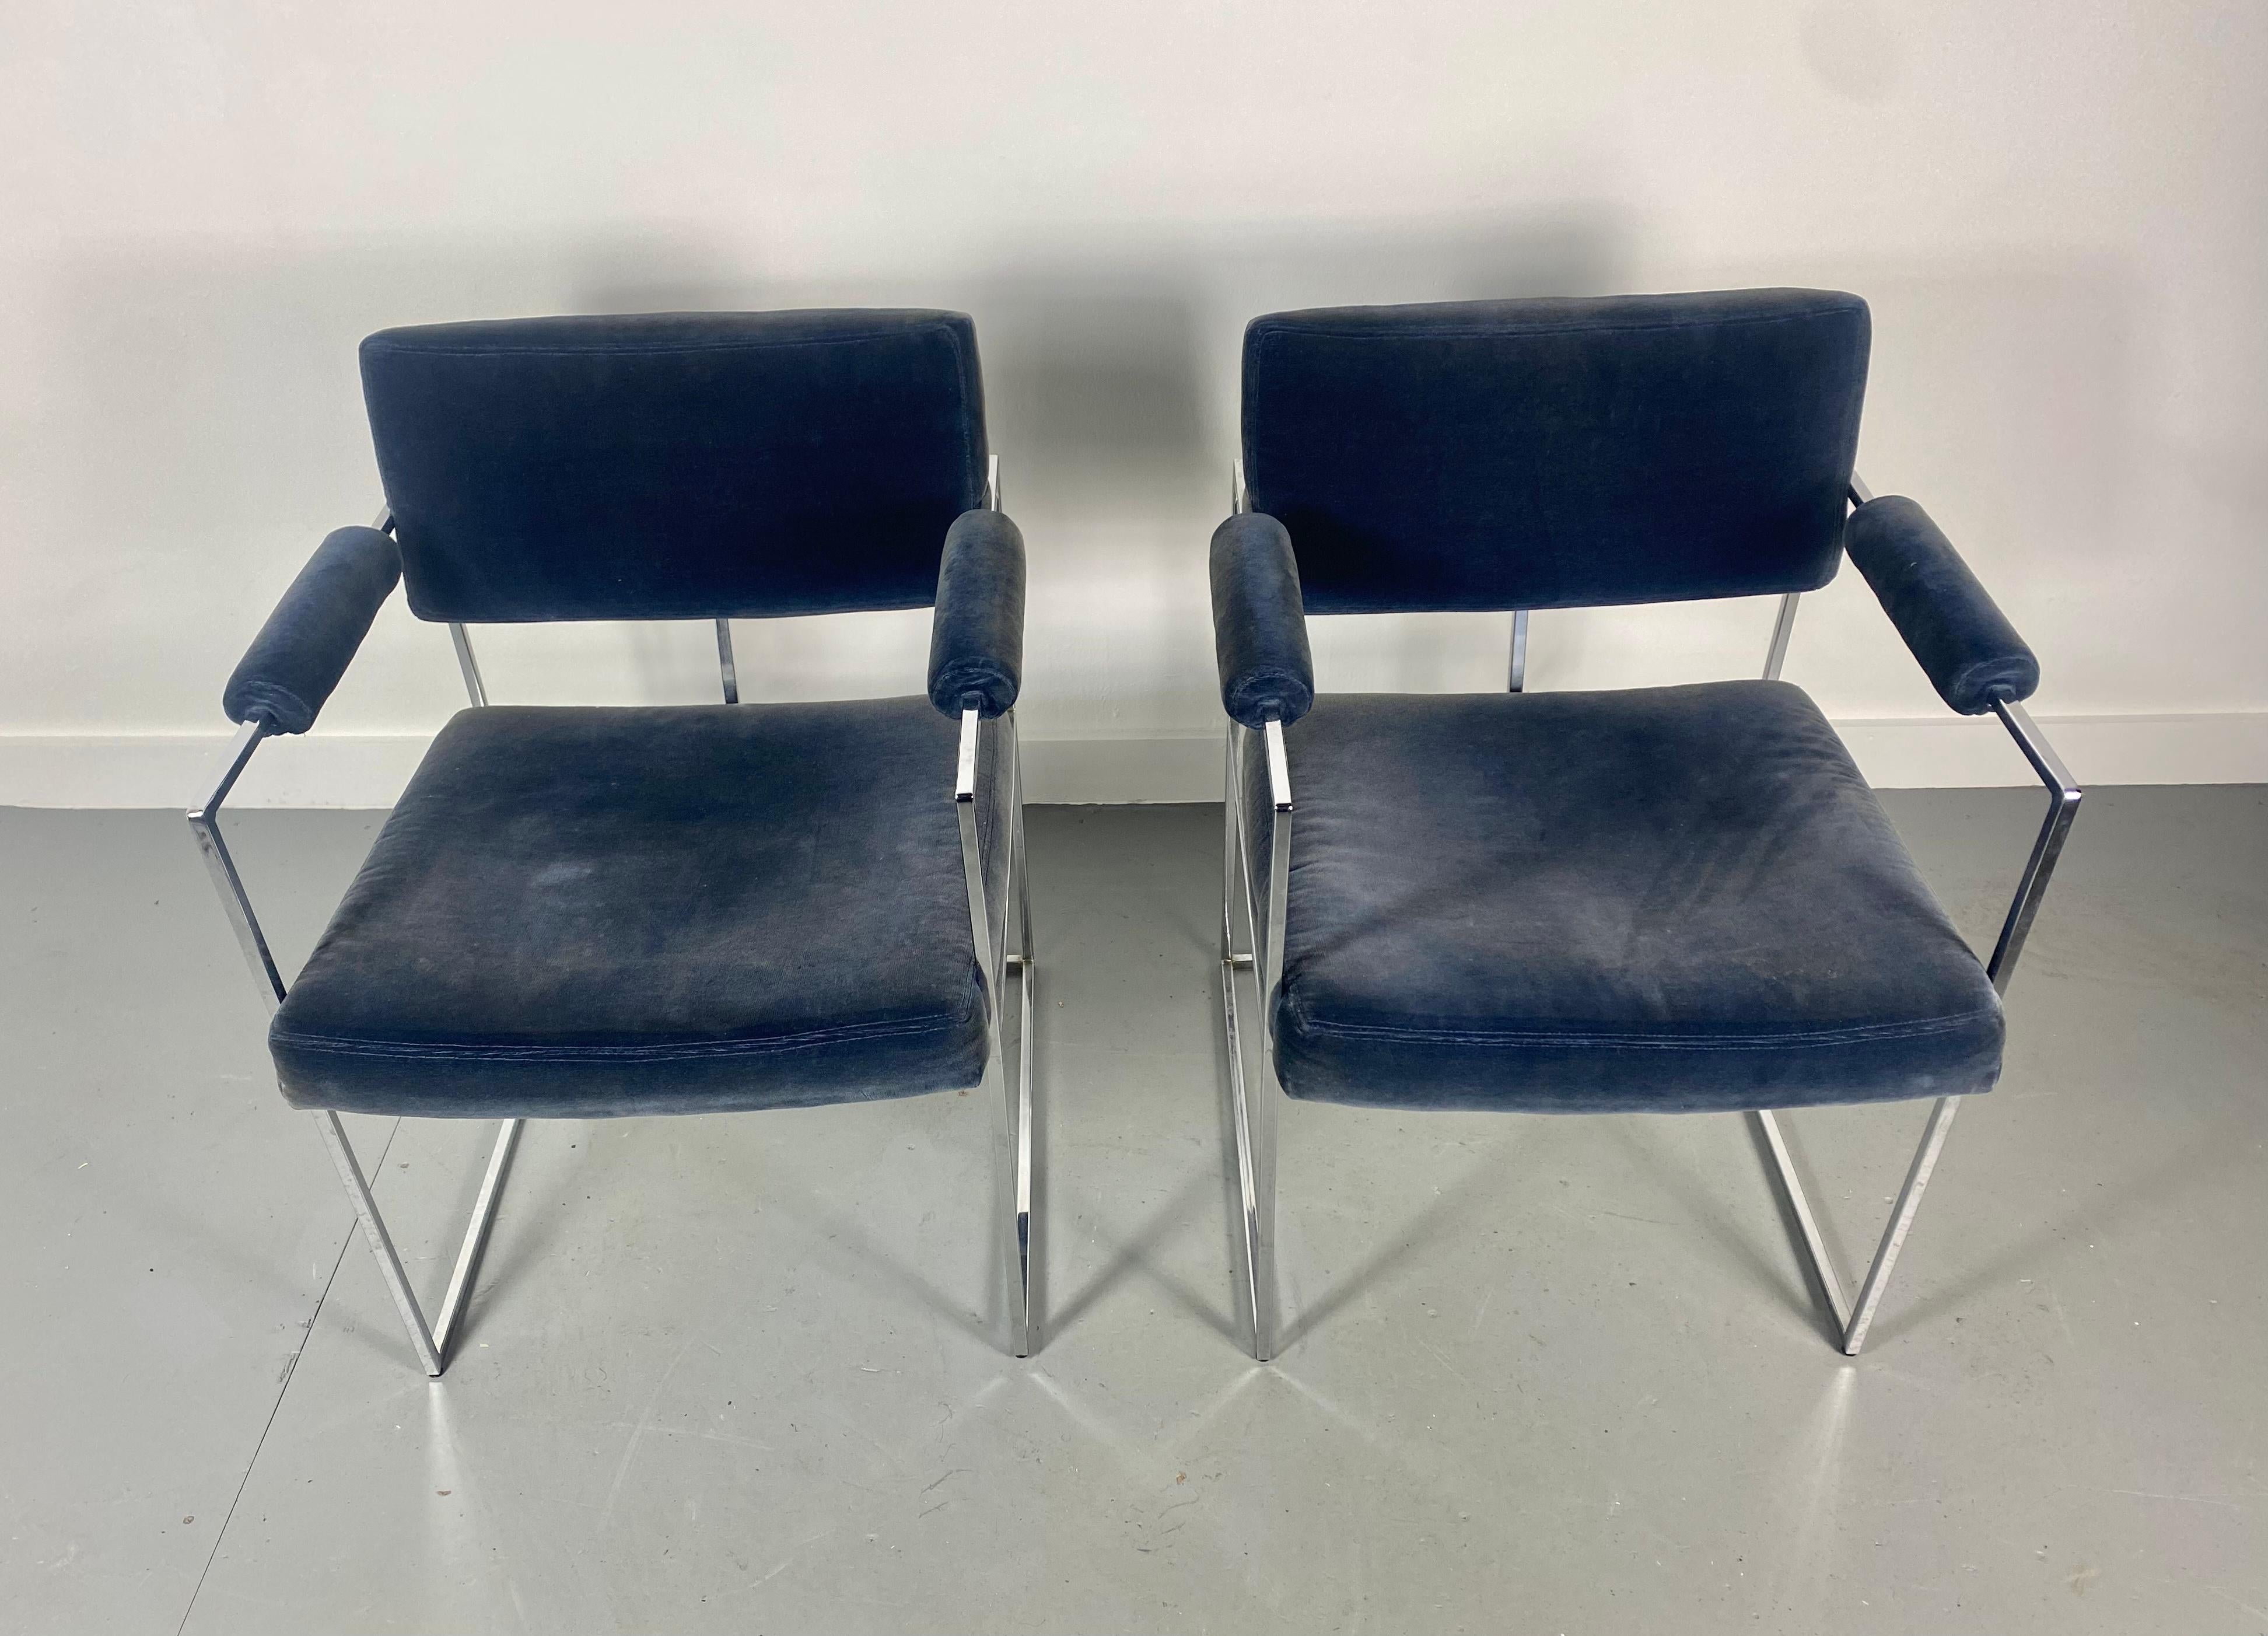 Outstanding Pair Milo Baughman Chrome Dining/ Lounge Chairs, Mid-Century Modern For Sale 4